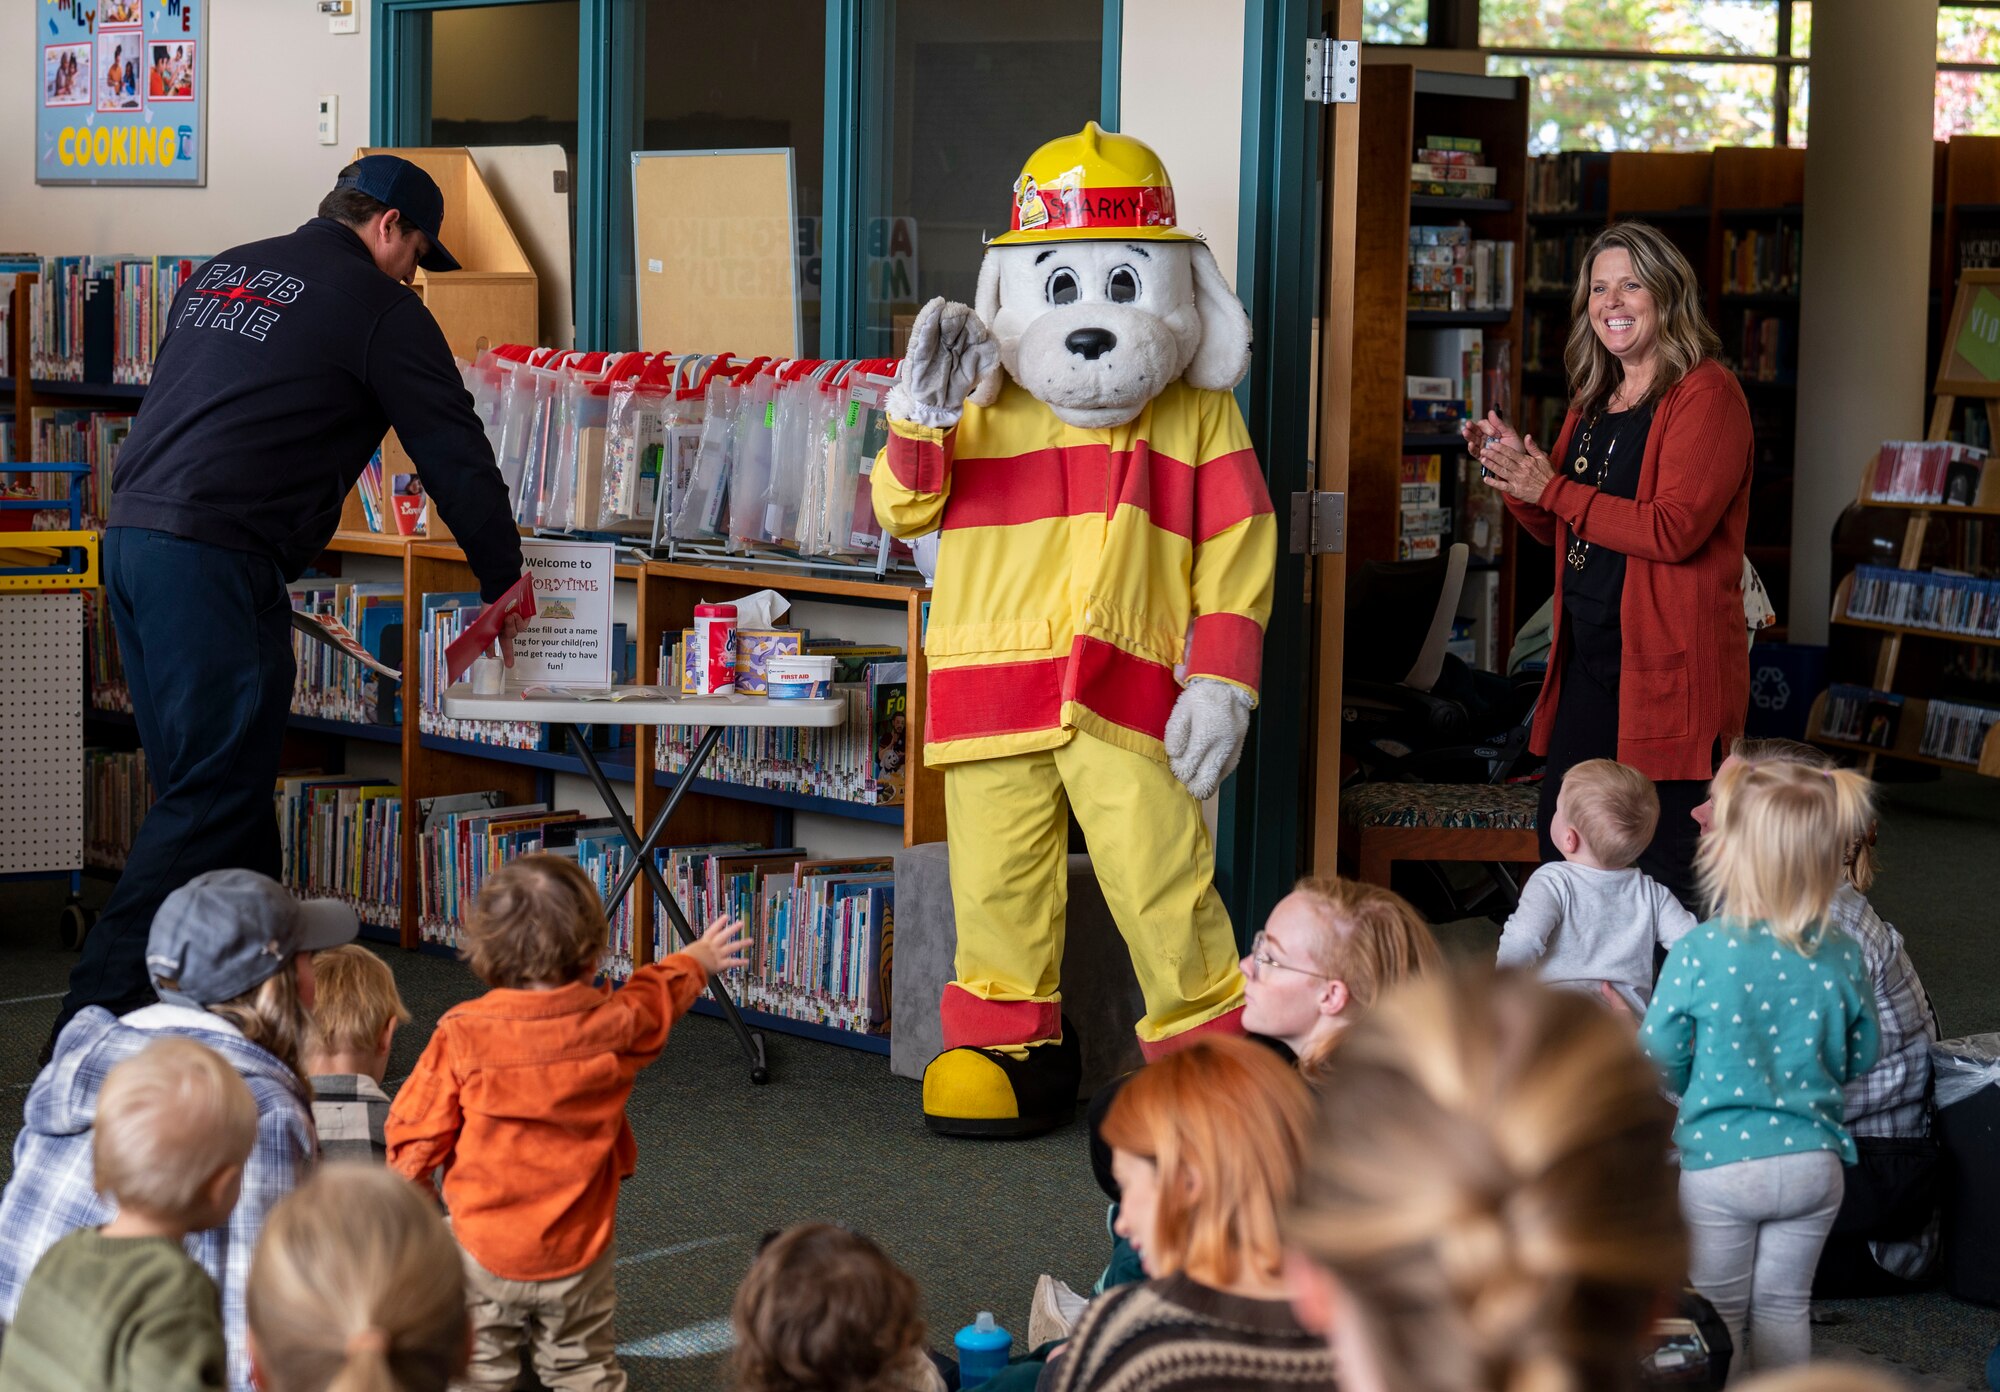 Sparky the Fire Dog, the mascot for the National Fire Protection Association, greets children.